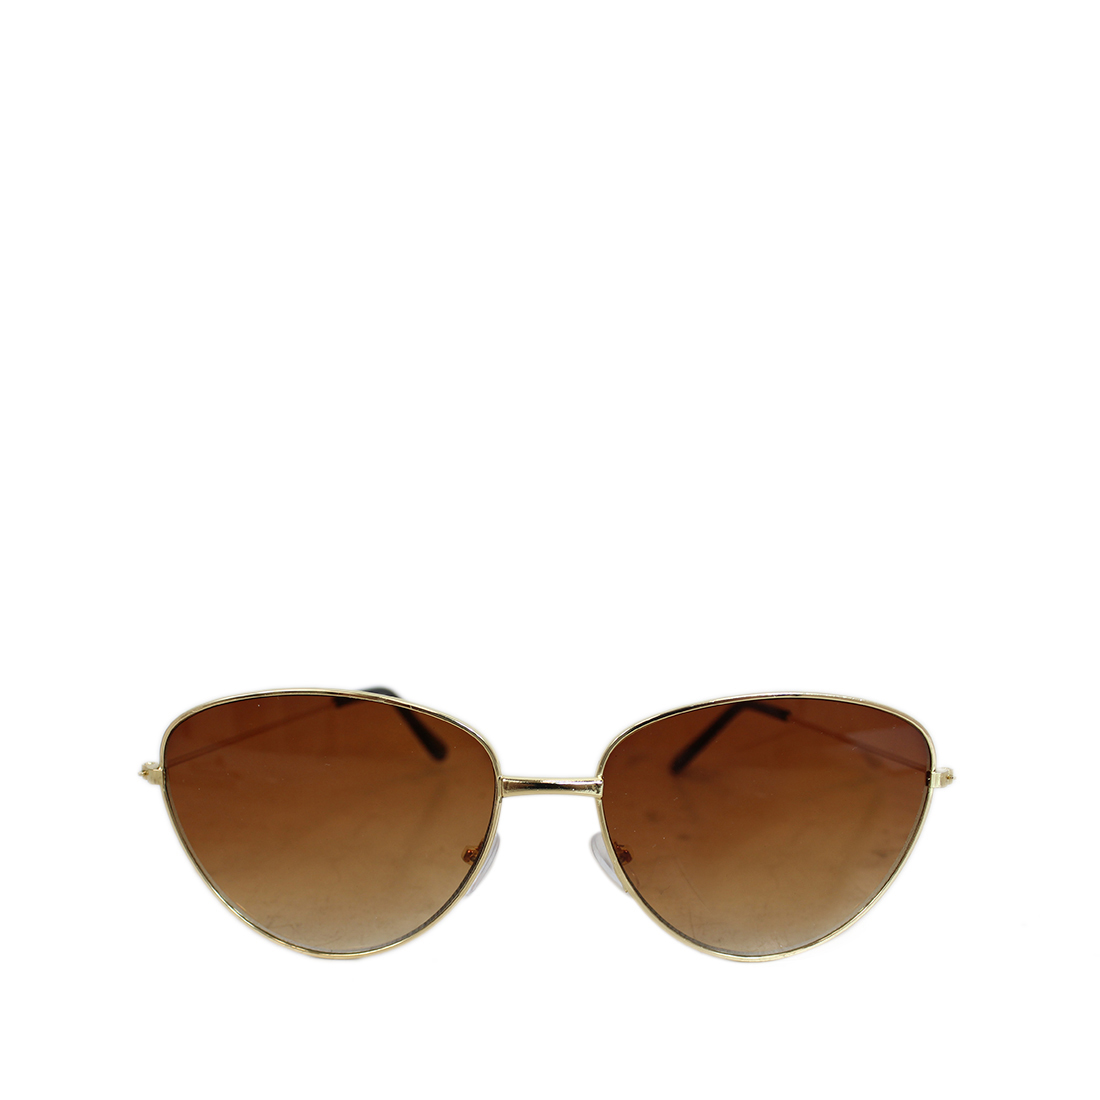 Aviator with gold frame